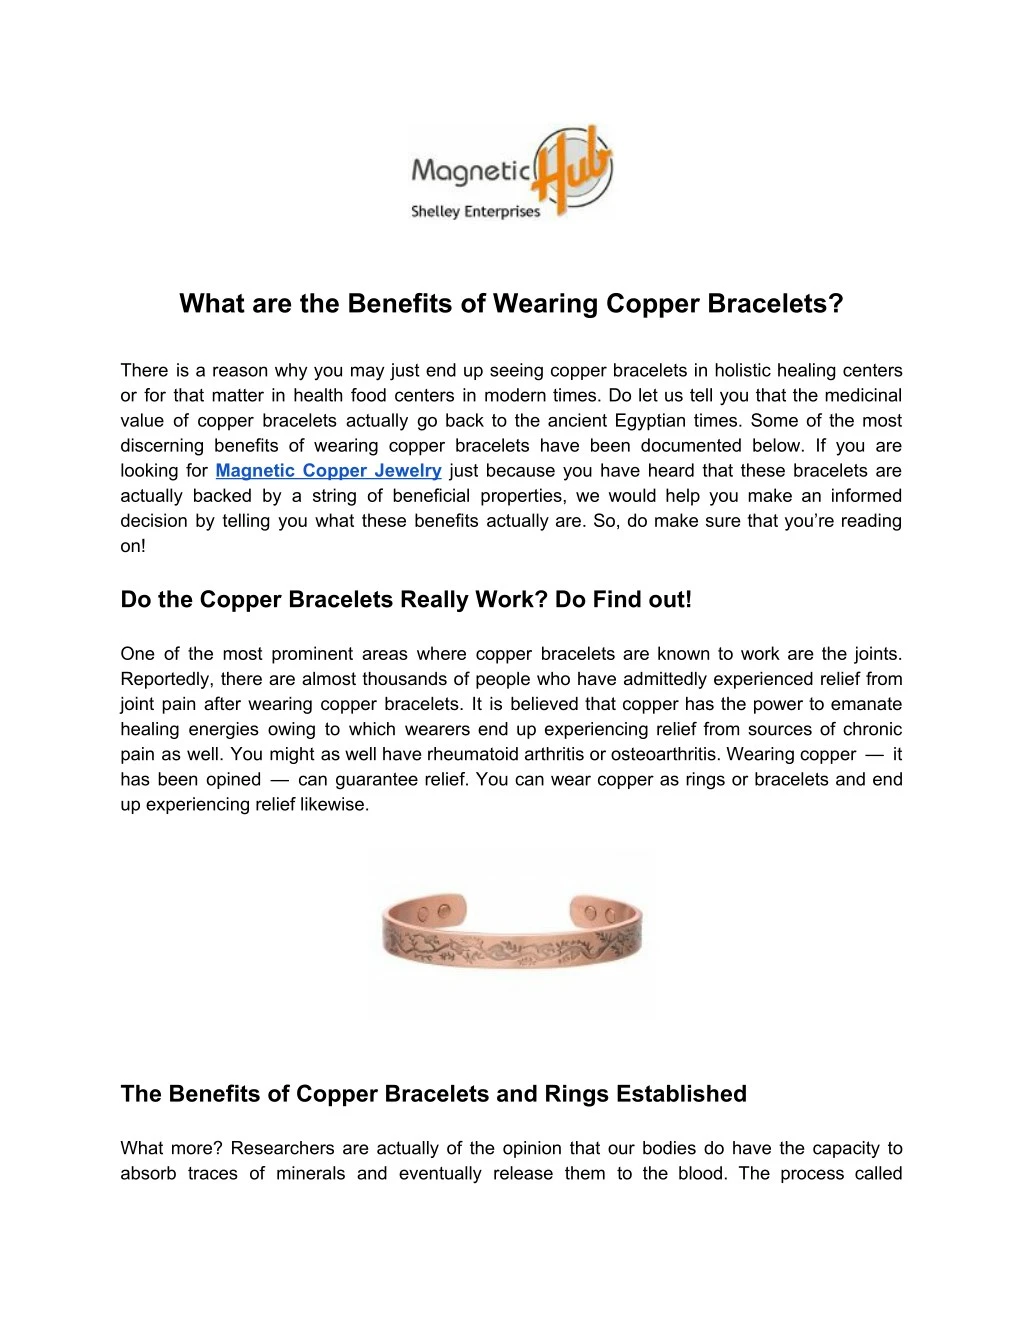 what are the benefits of wearing copper bracelets